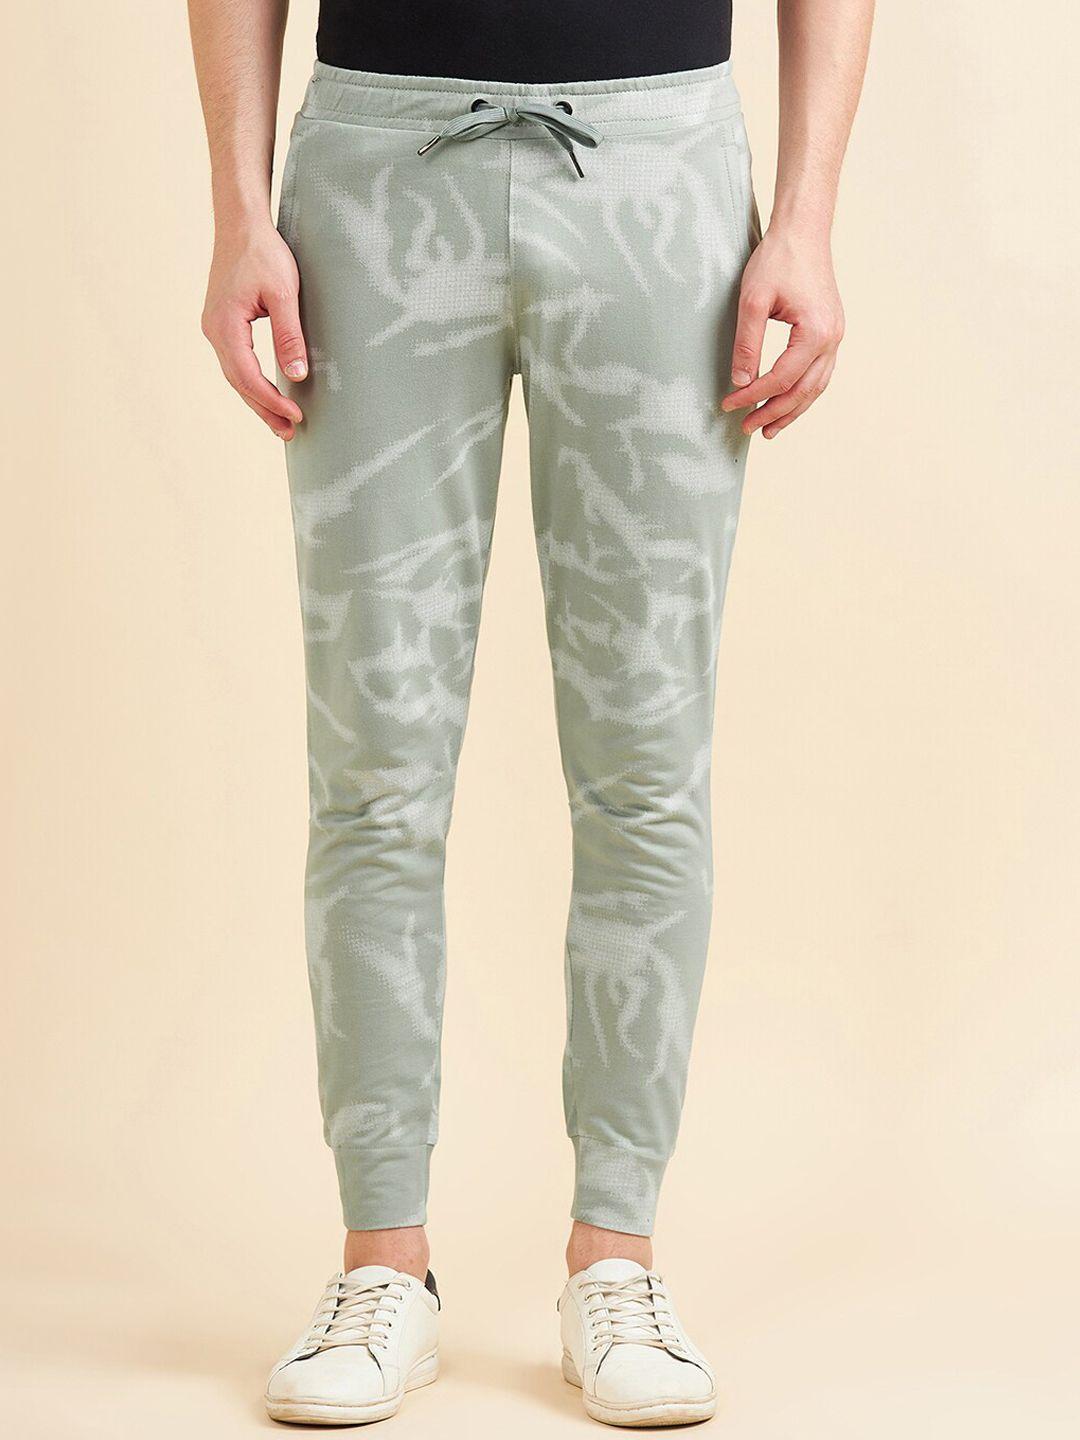 sweet dreams men olive green abstract printed mid-rise joggers